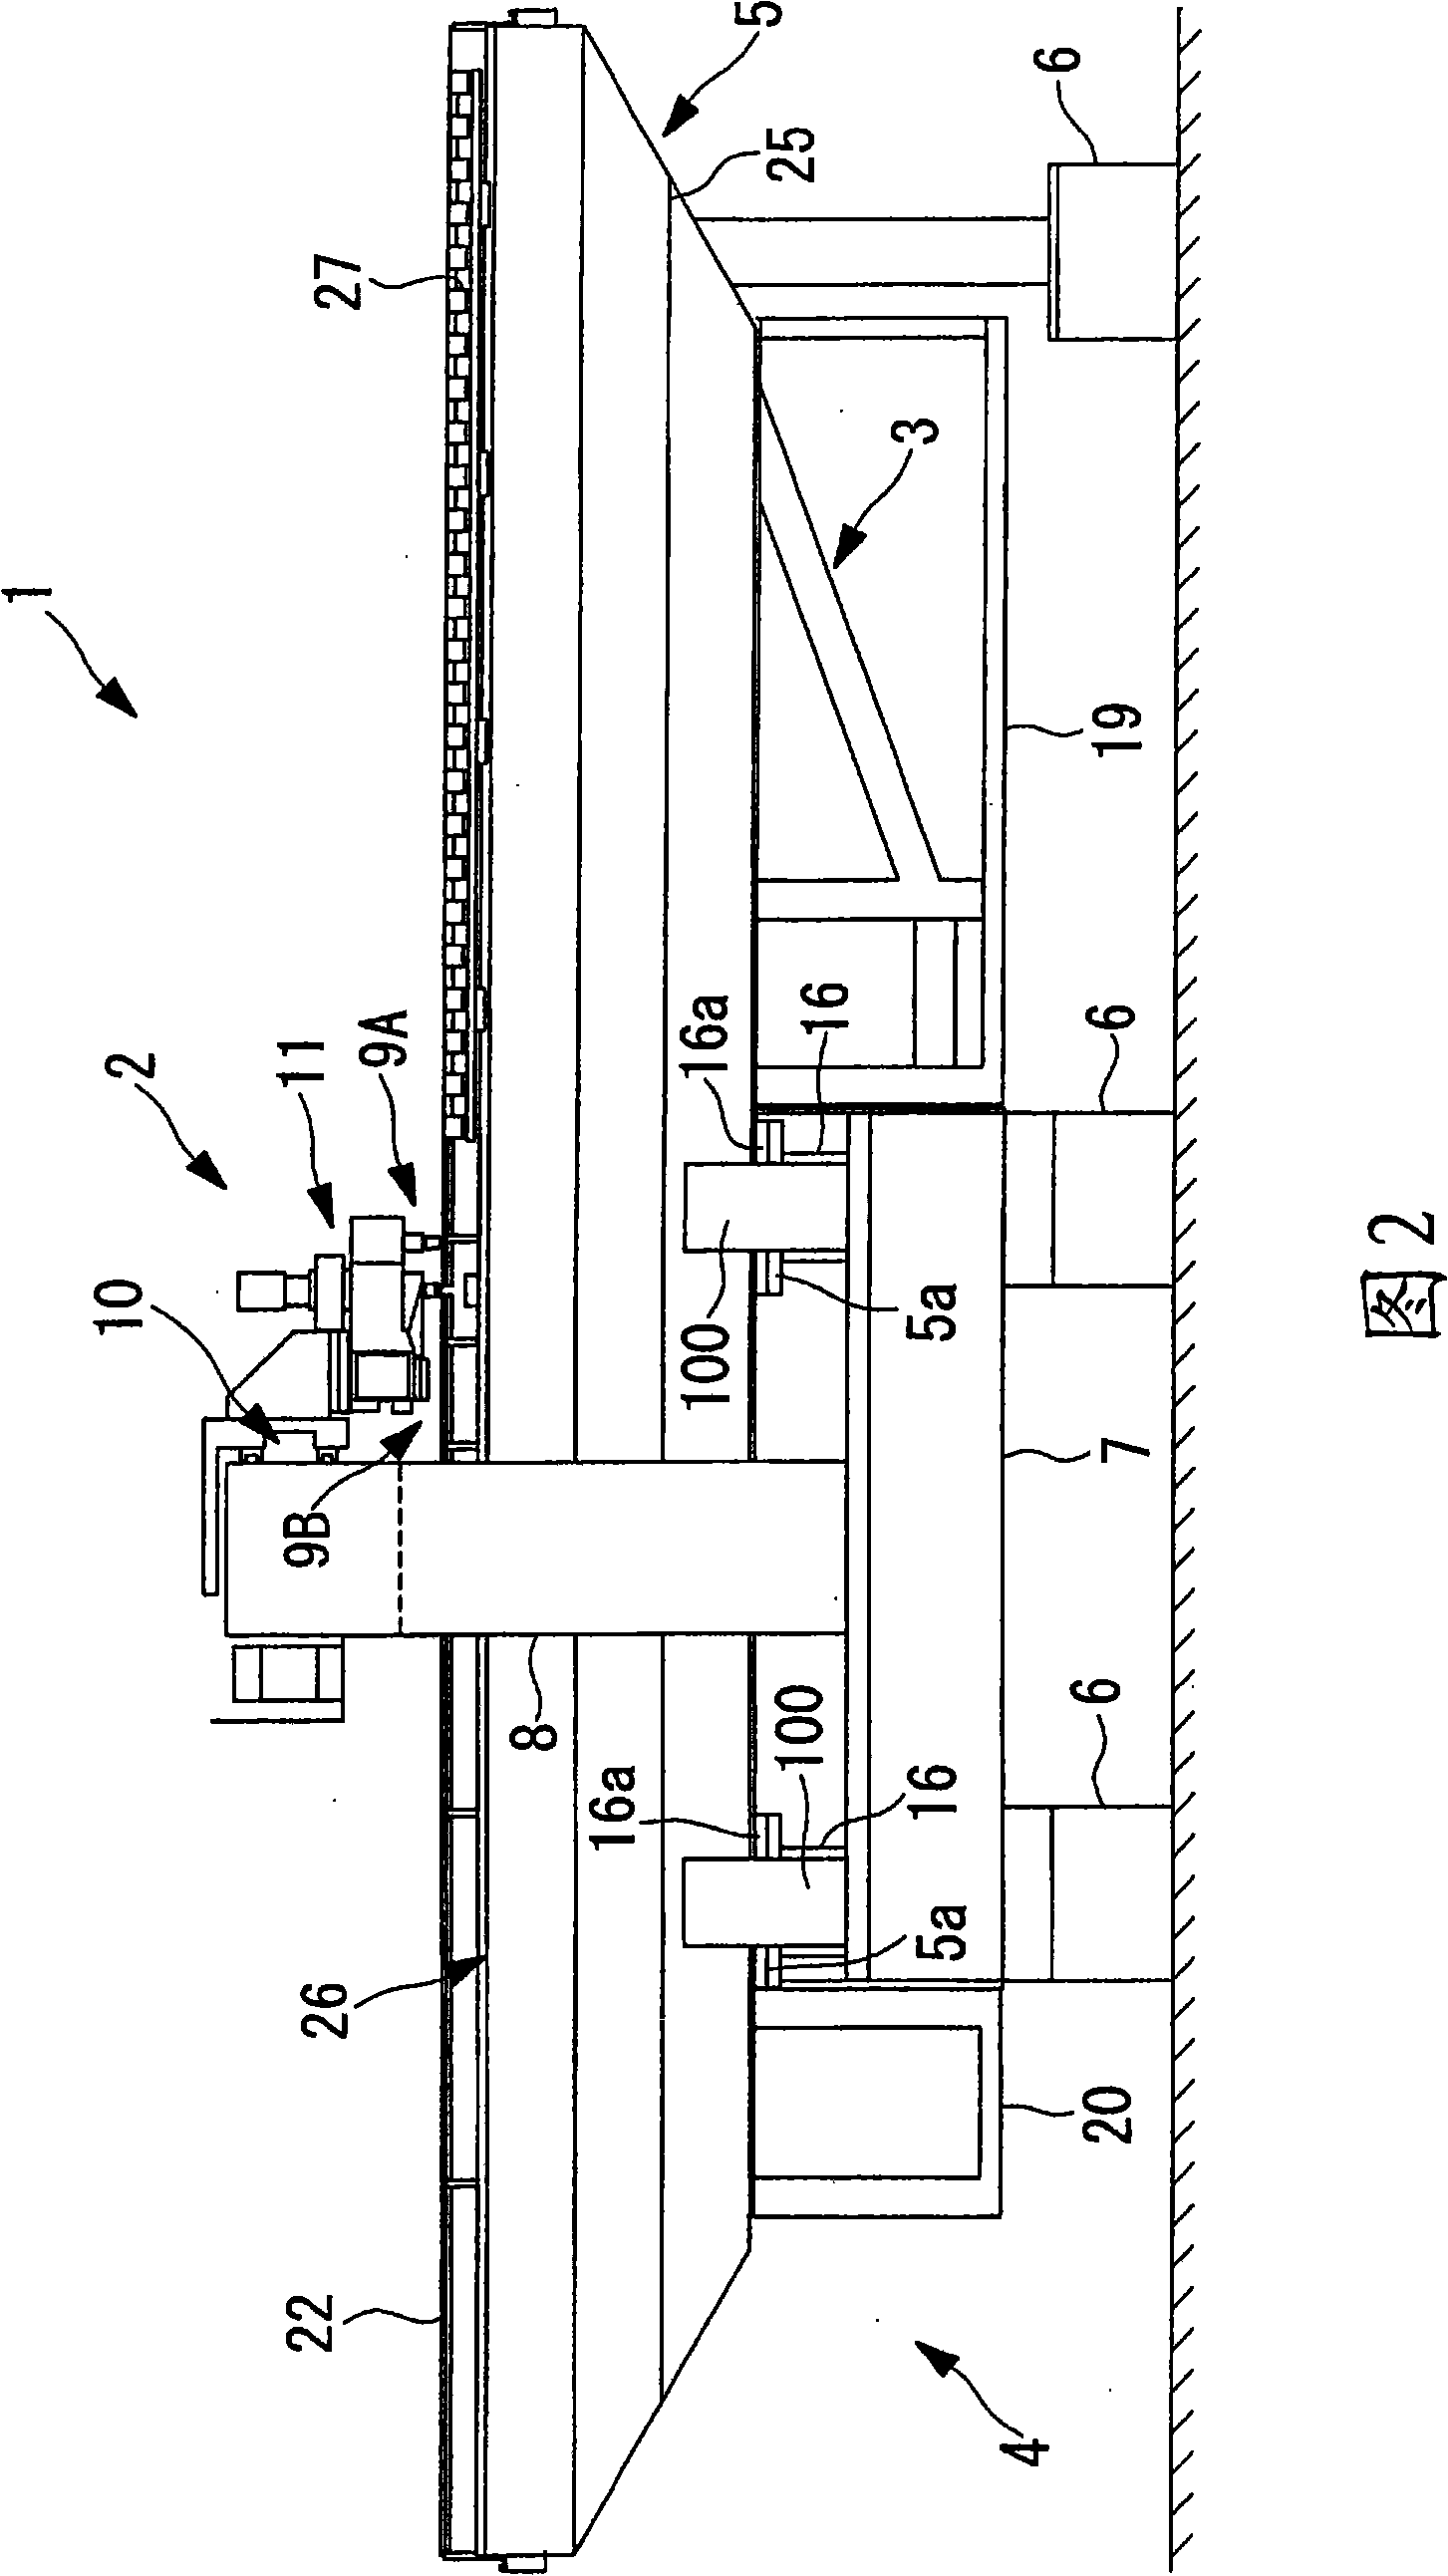 Substrate inspecting apparatus